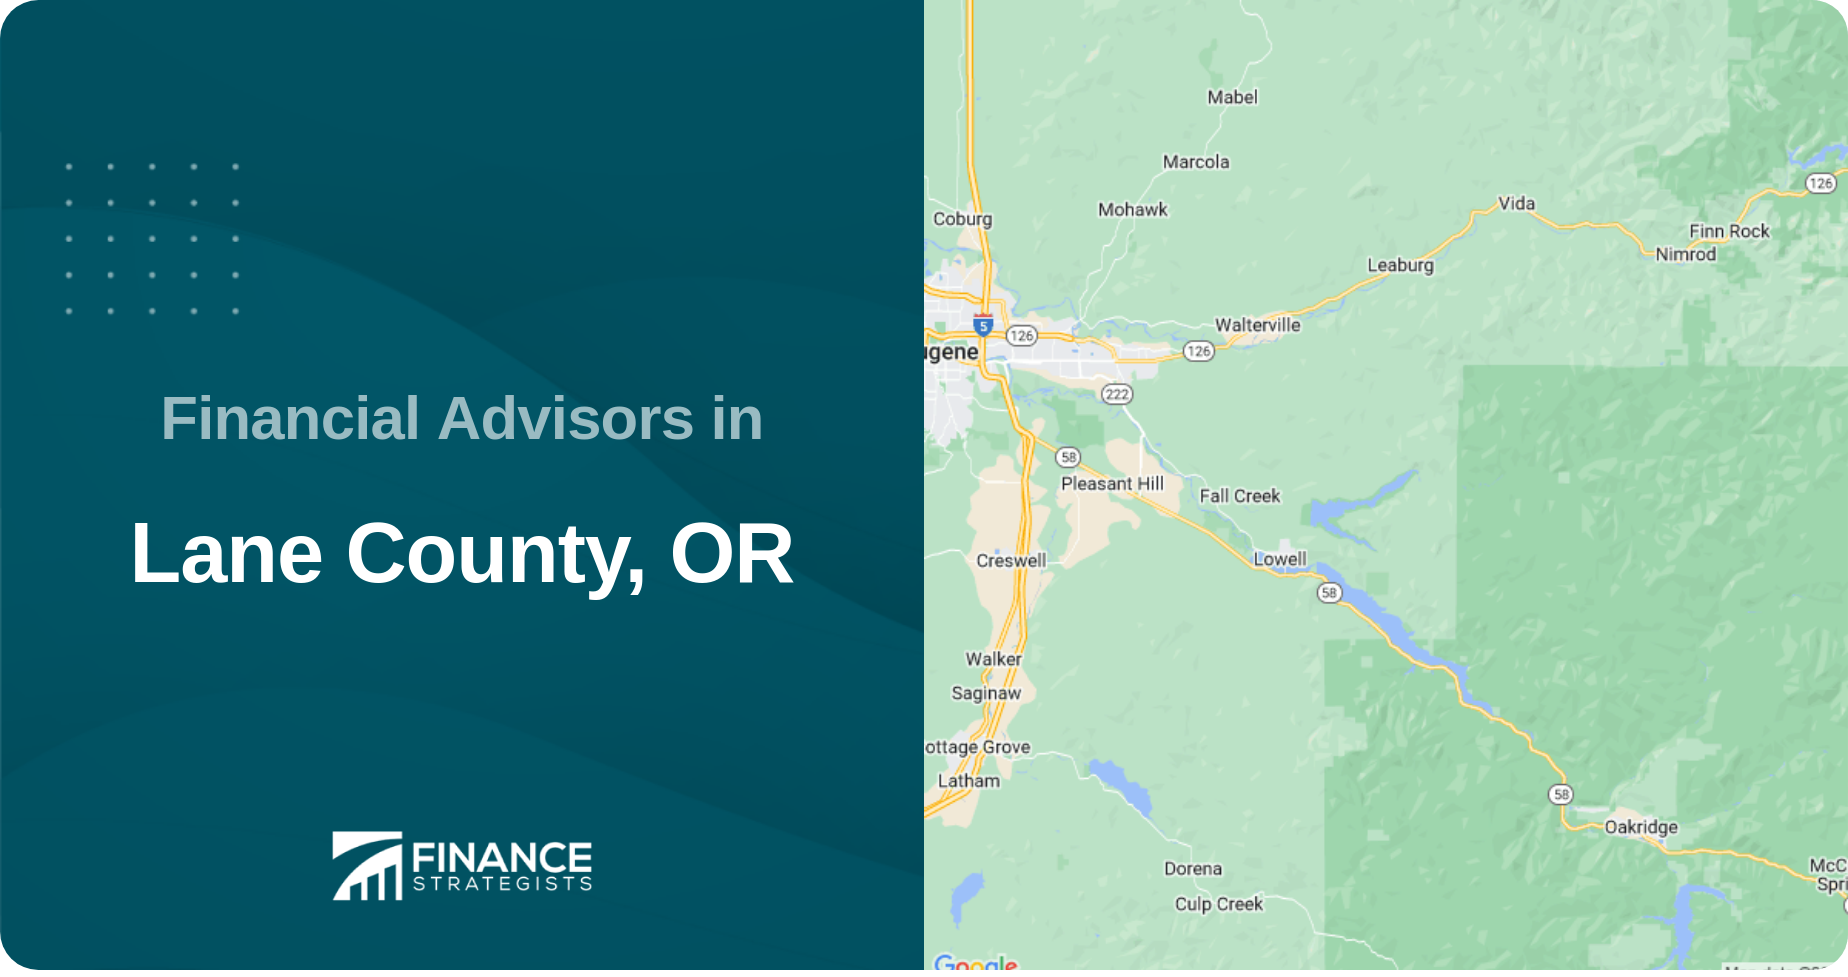 Financial Advisors in Lane County, OR